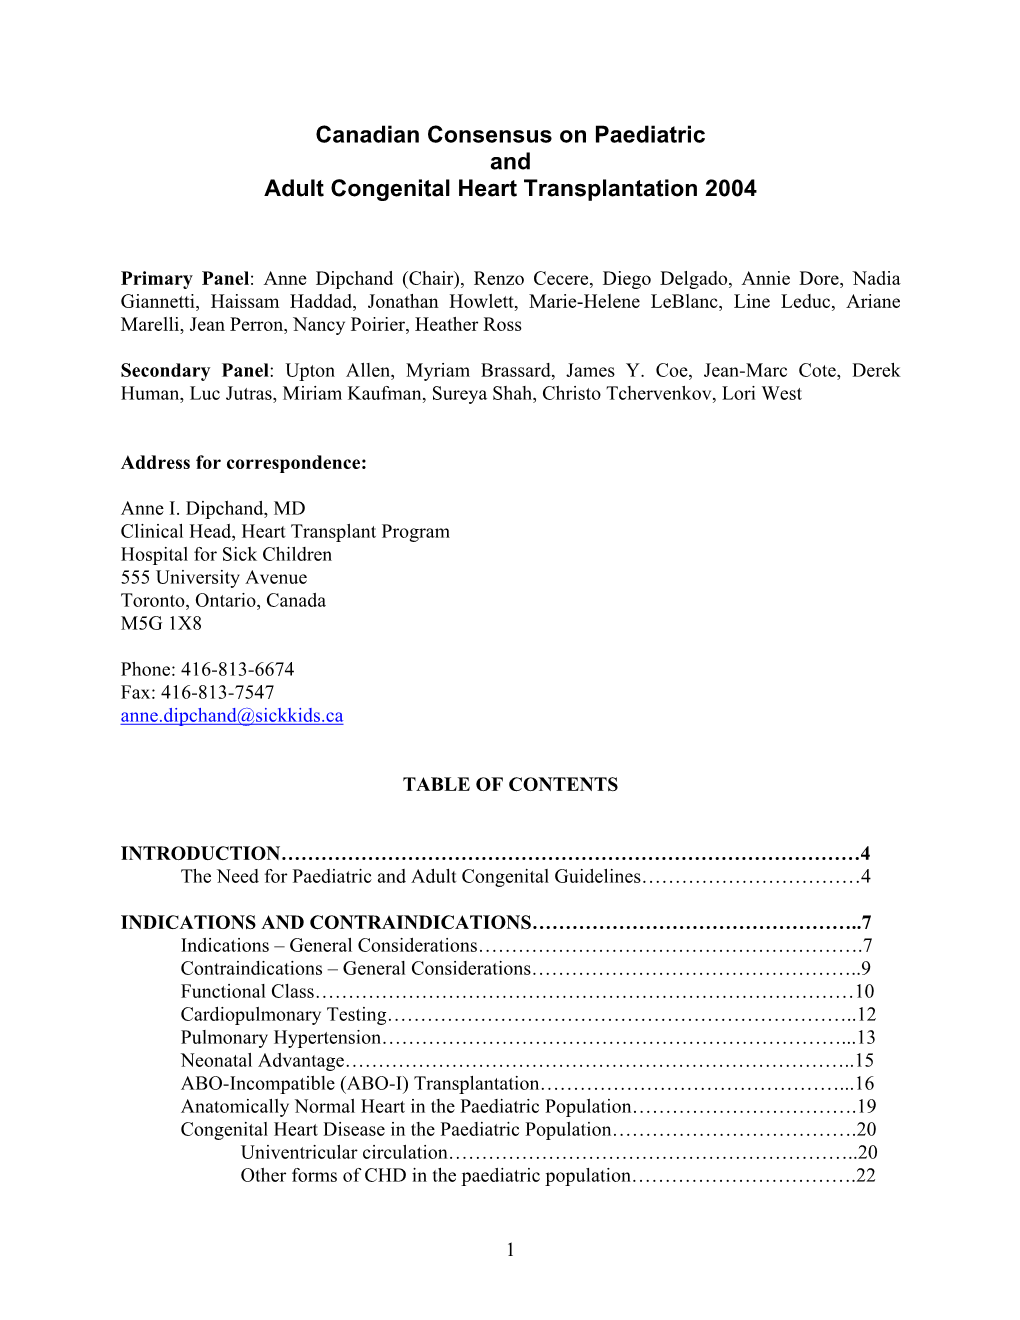 Canadian Consensus on Paediatric and Adult Congenital Heart Transplantation 2004